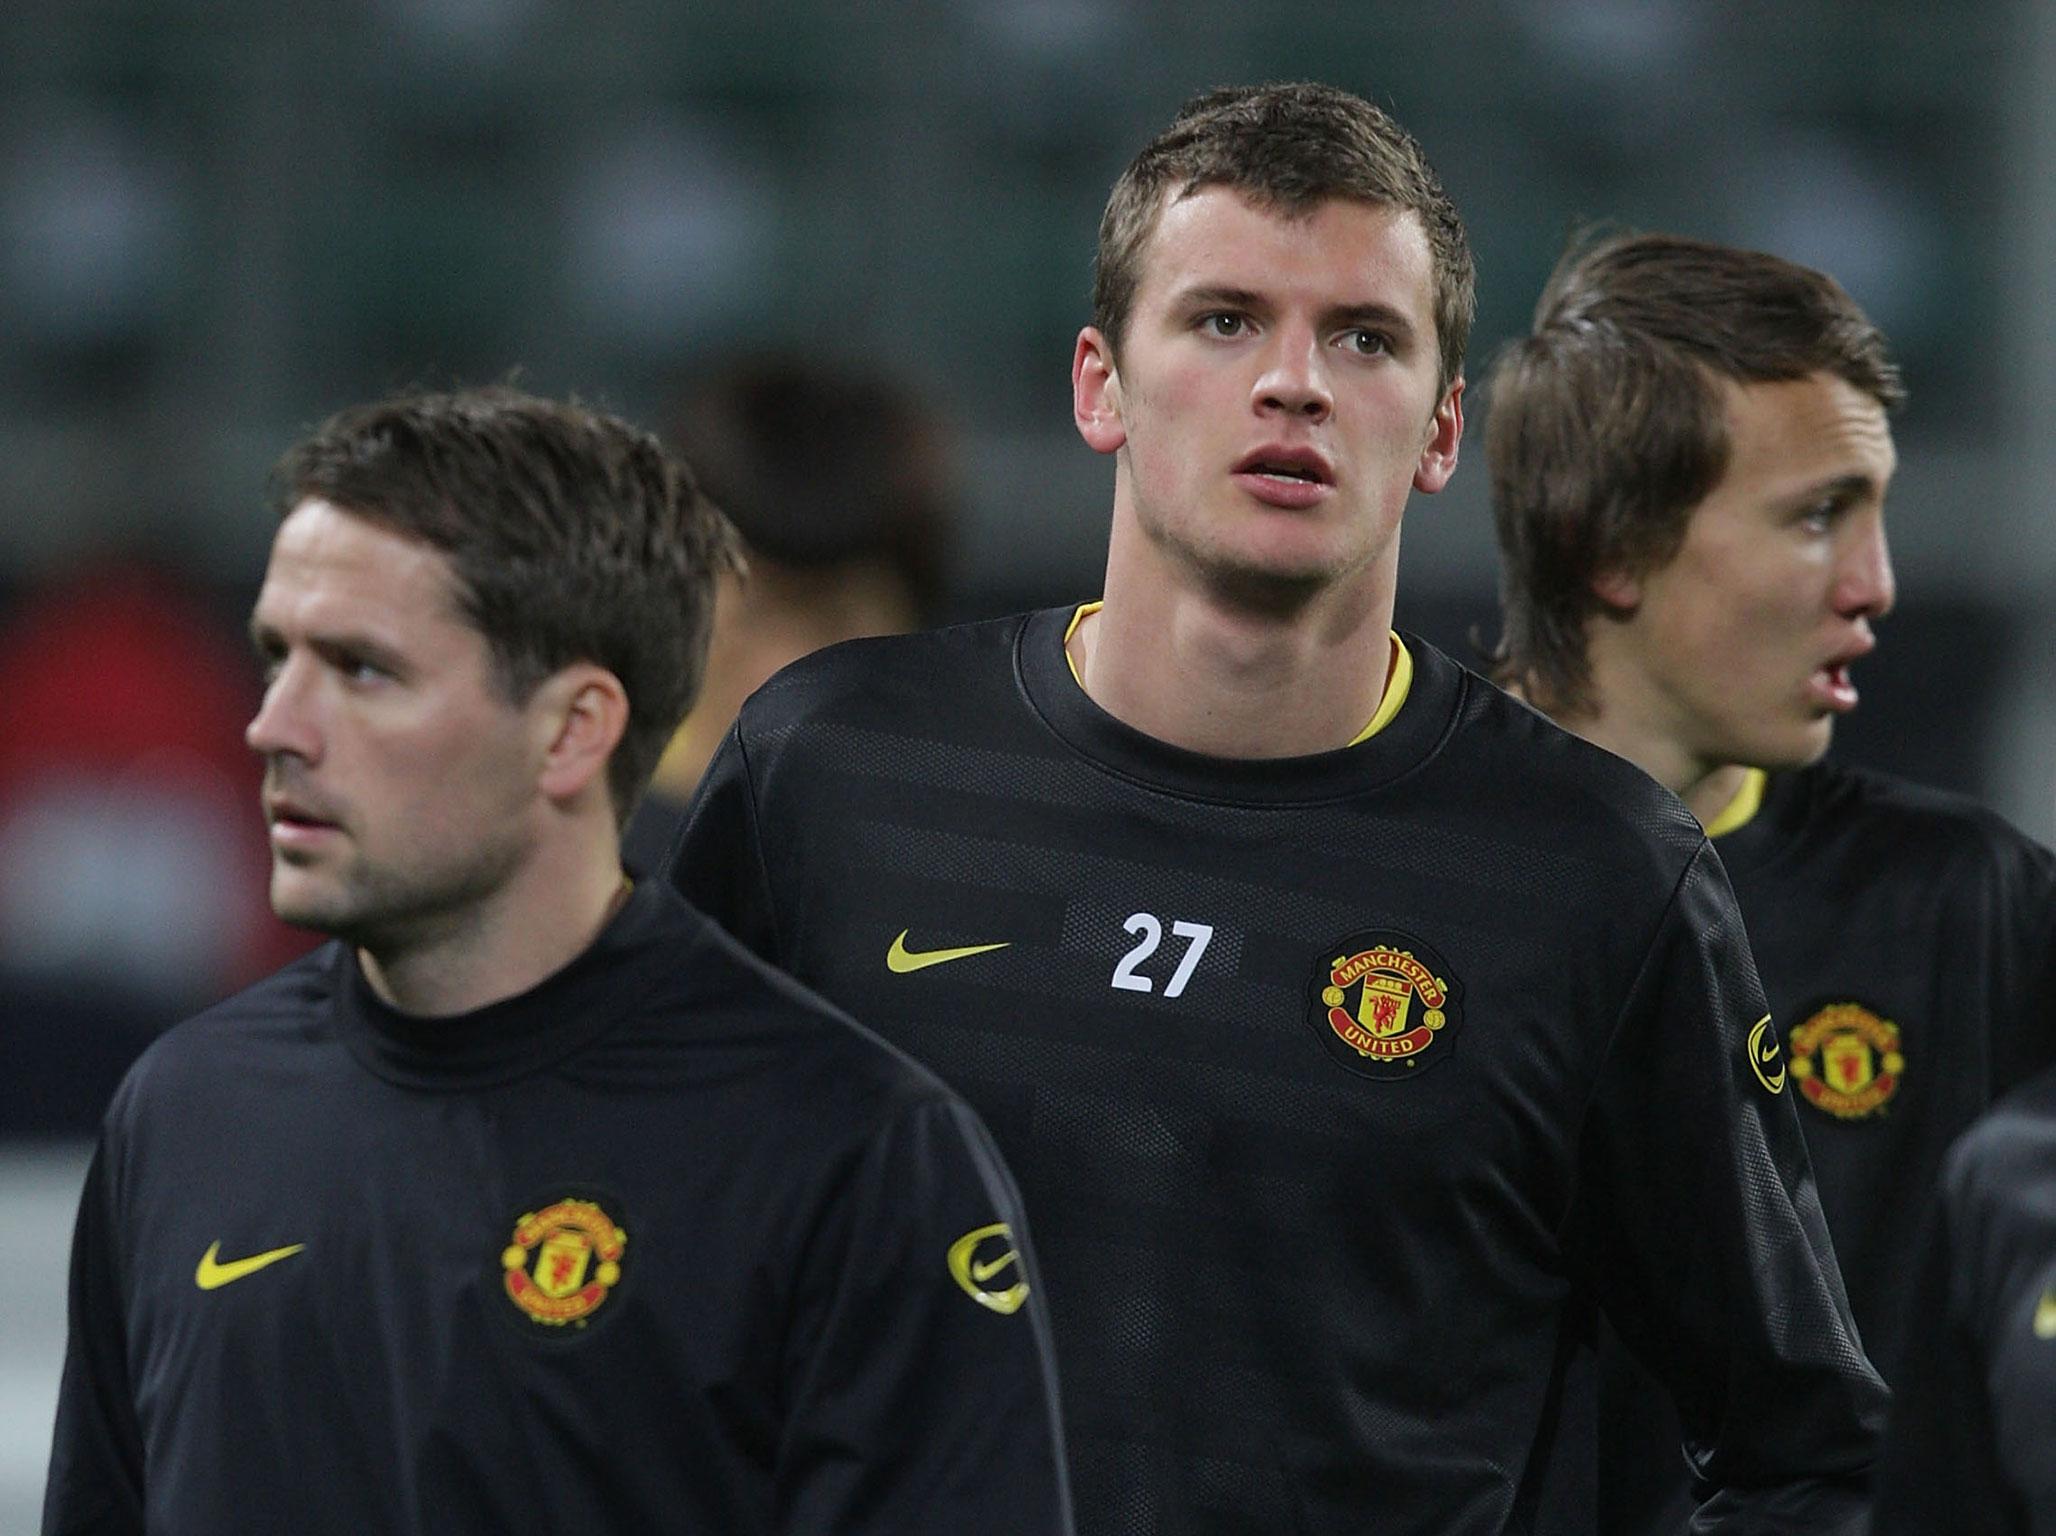 Oliver Gill made only four appearances in Manchester United's first team squad before choosing another path